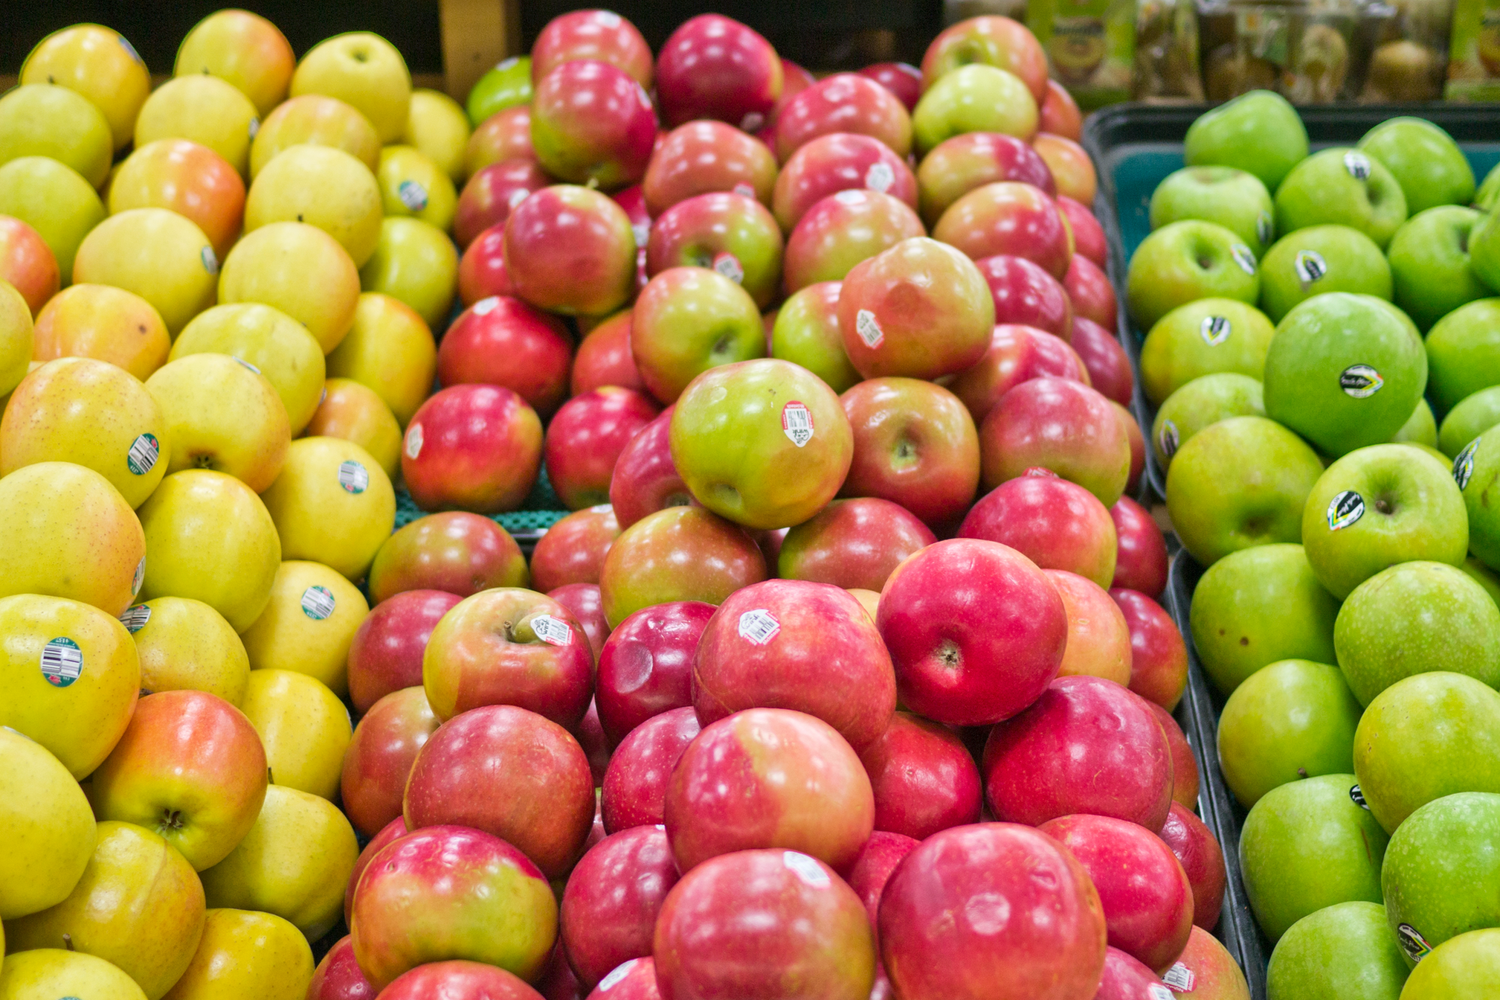 Your Guide to the Best Apples for Baking and Cooking